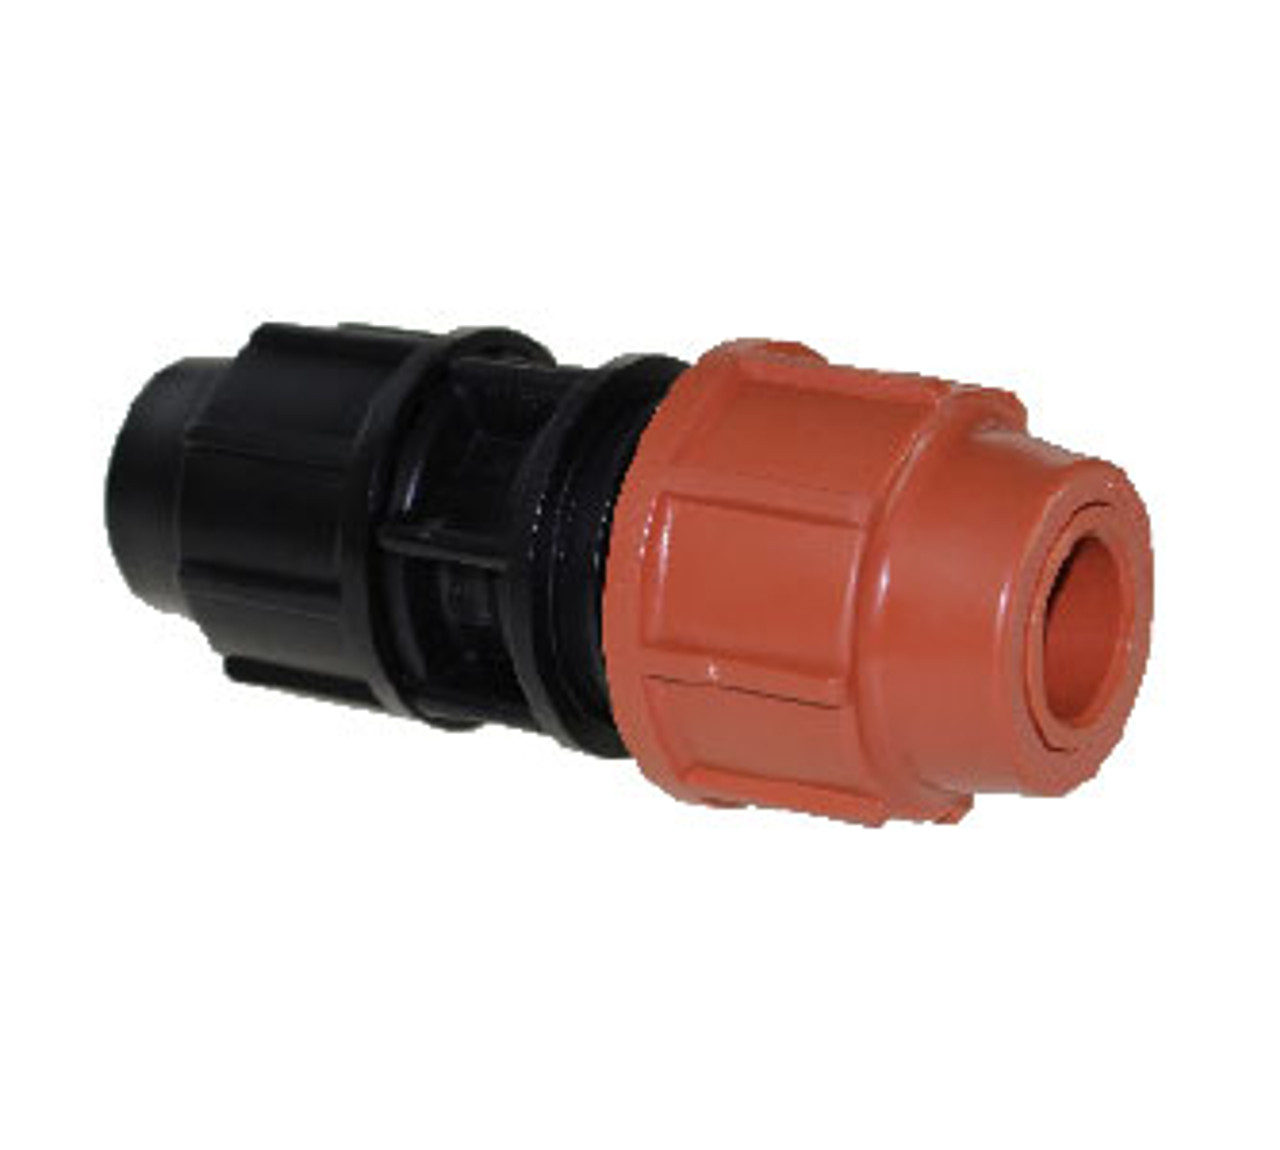 UltraAir Metric Compression Connector - Poly to Copper 32 x 20